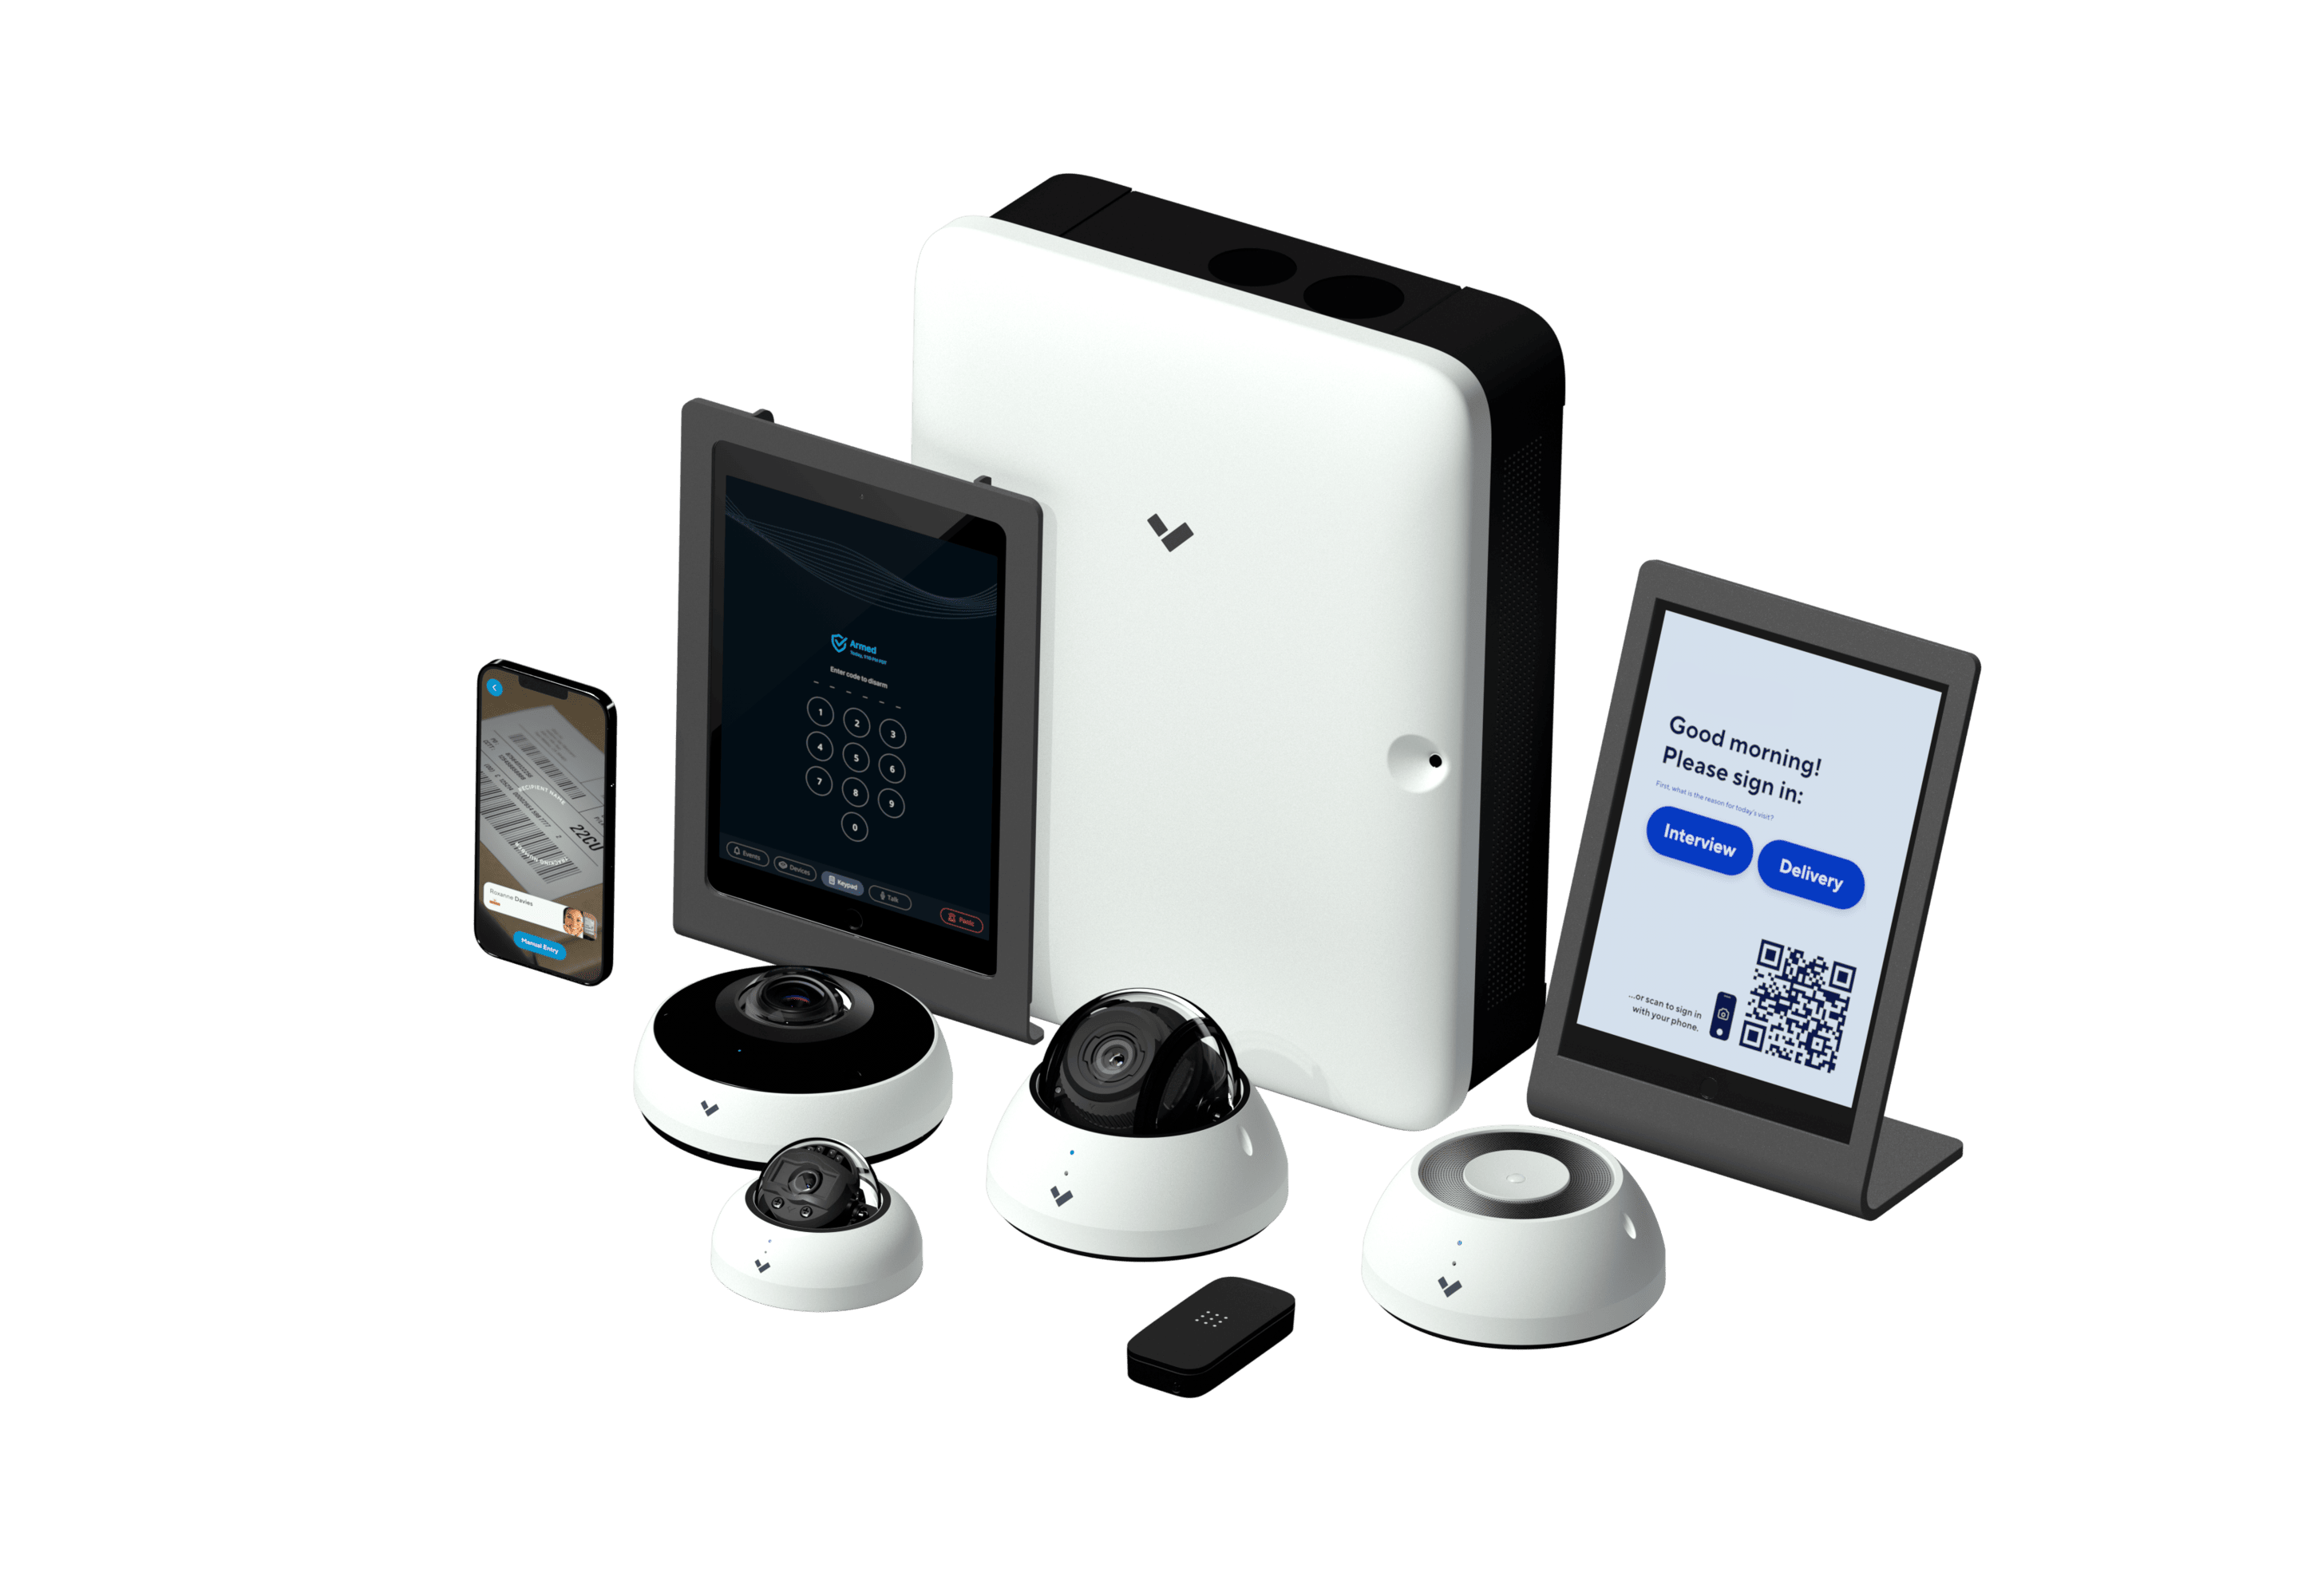 Verkada Device Family contains an advanced panoramic security